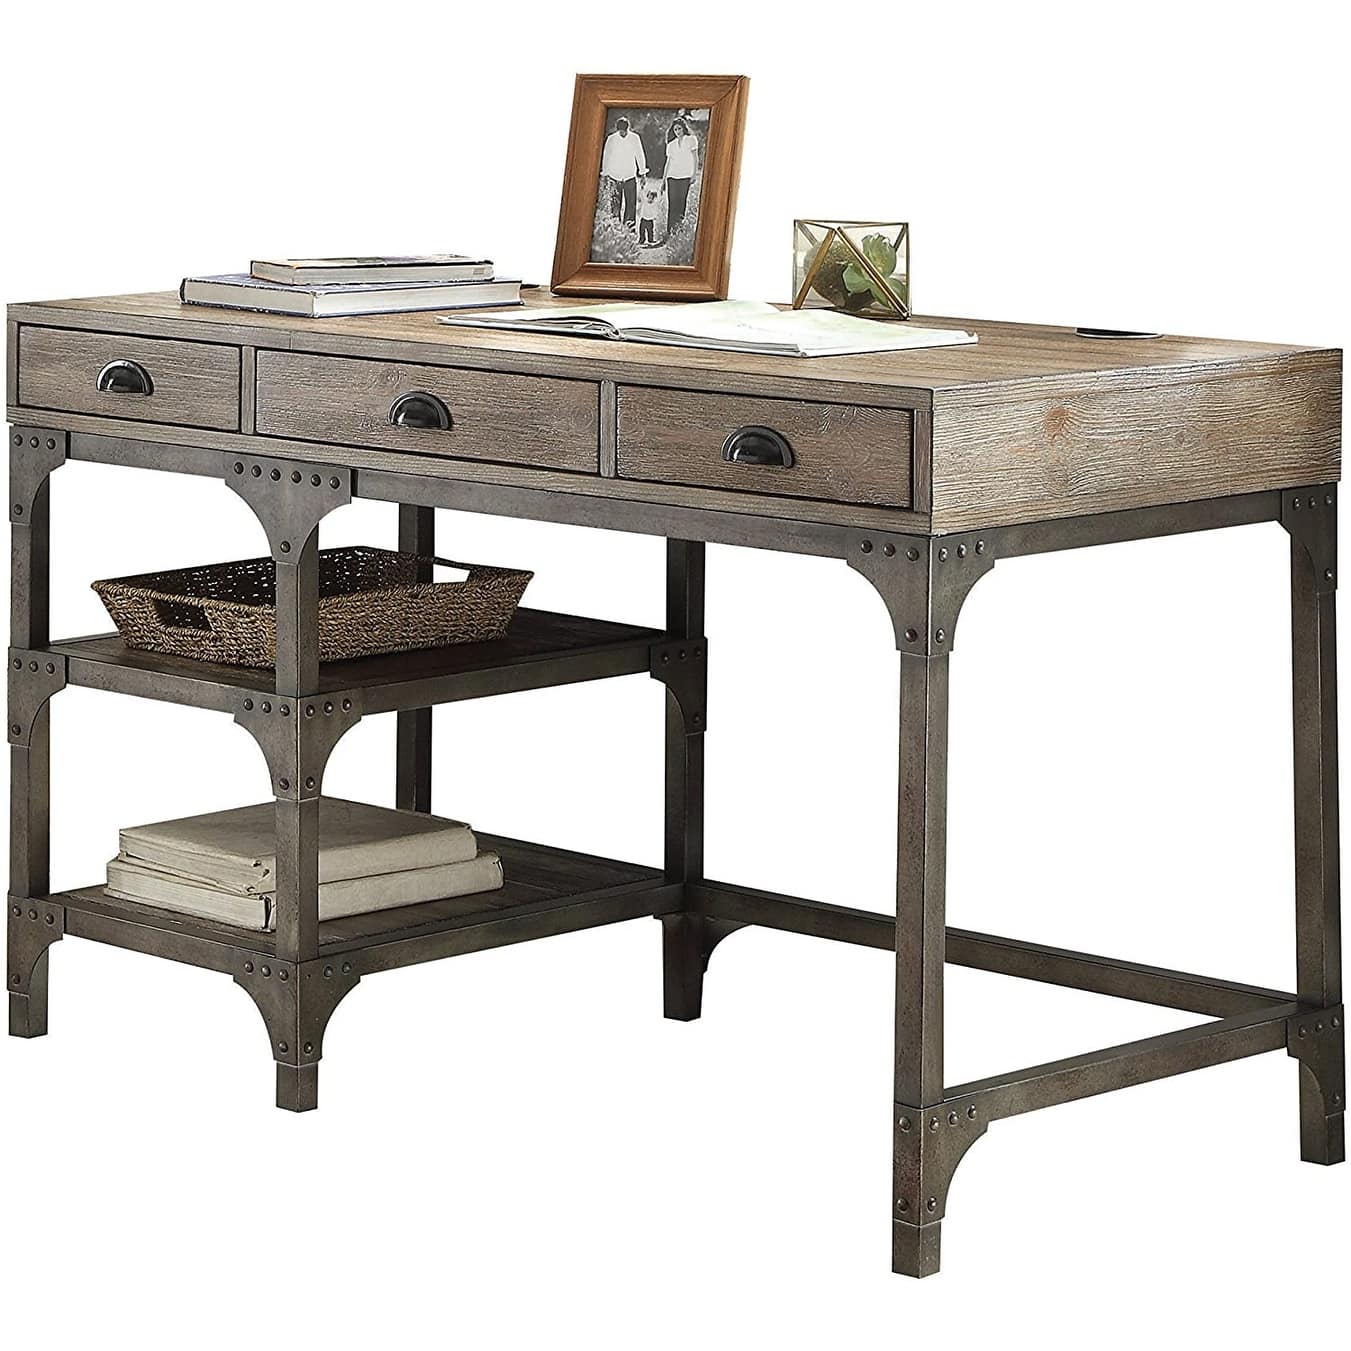 Industrial Writing Desk in Weathered Oak & Antique Silver with 3 Drawers and 2 Shelves